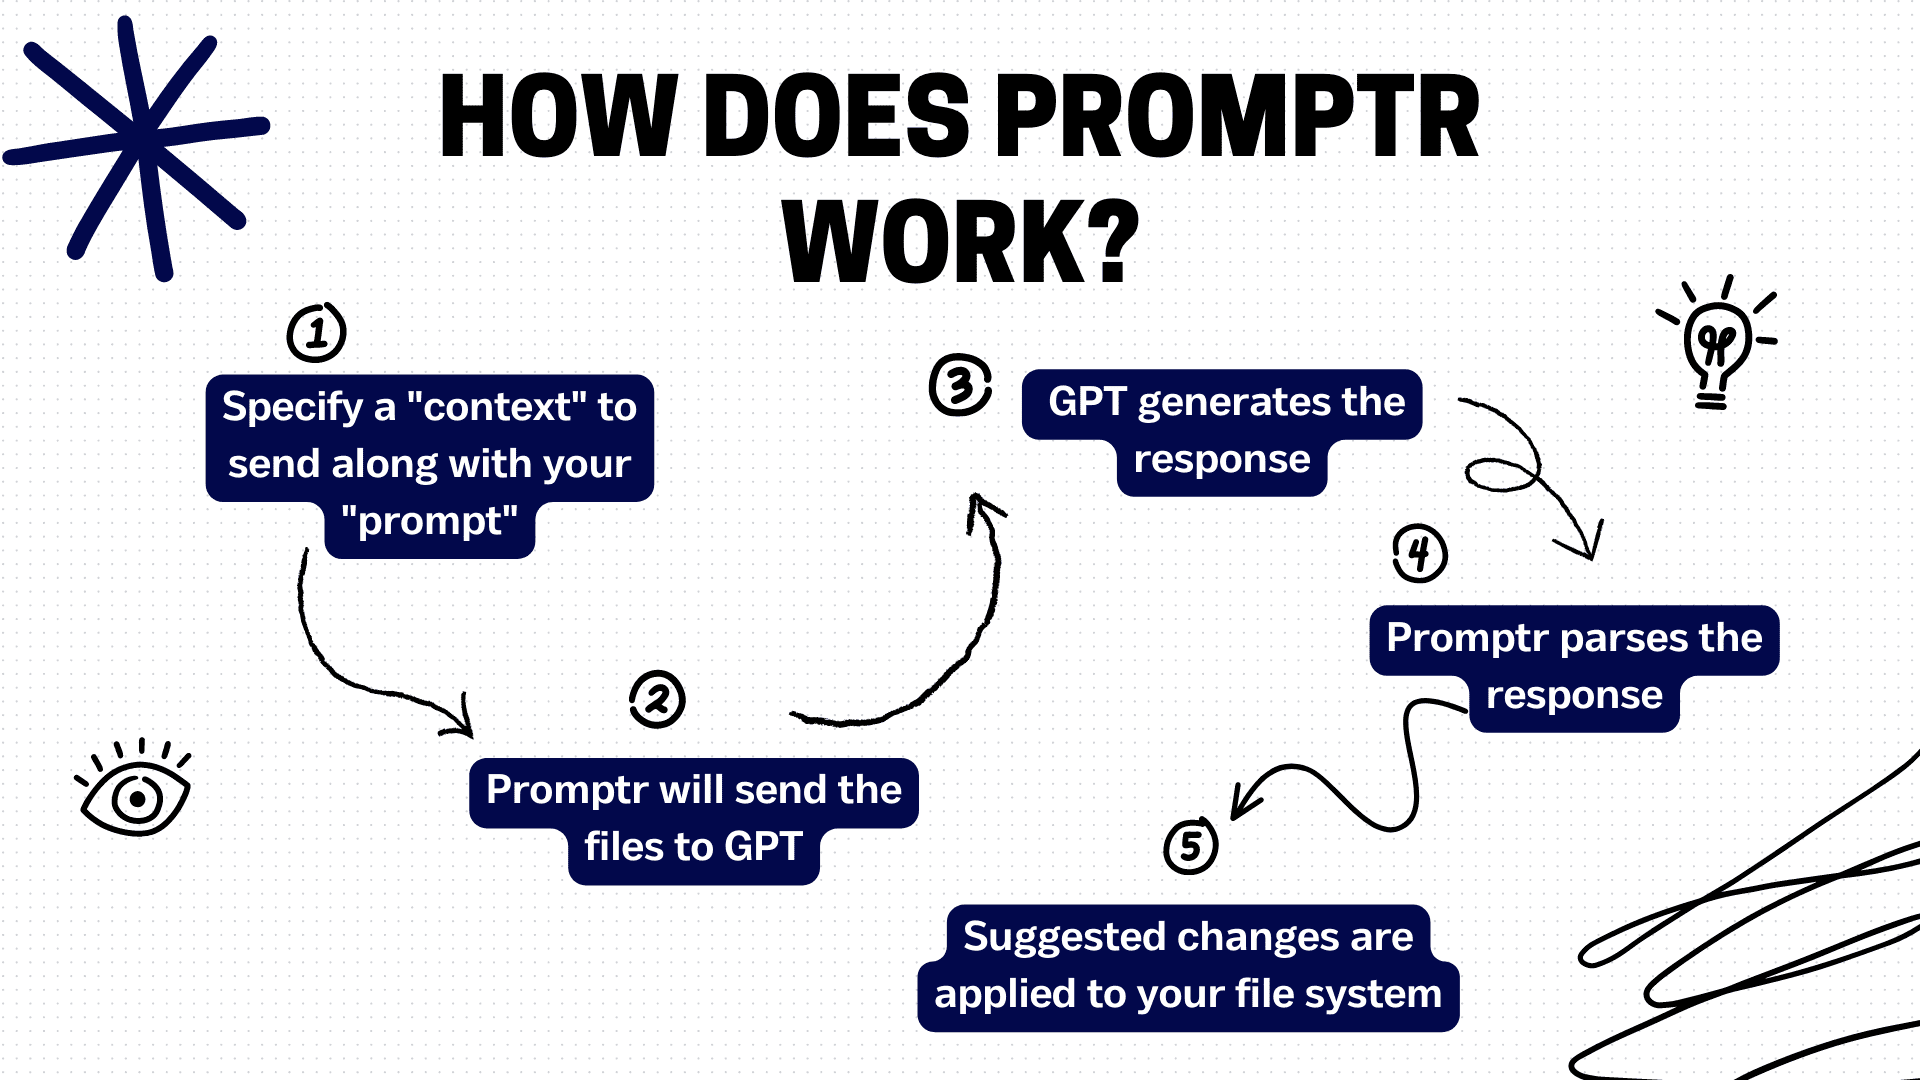 How does Promptr Work?